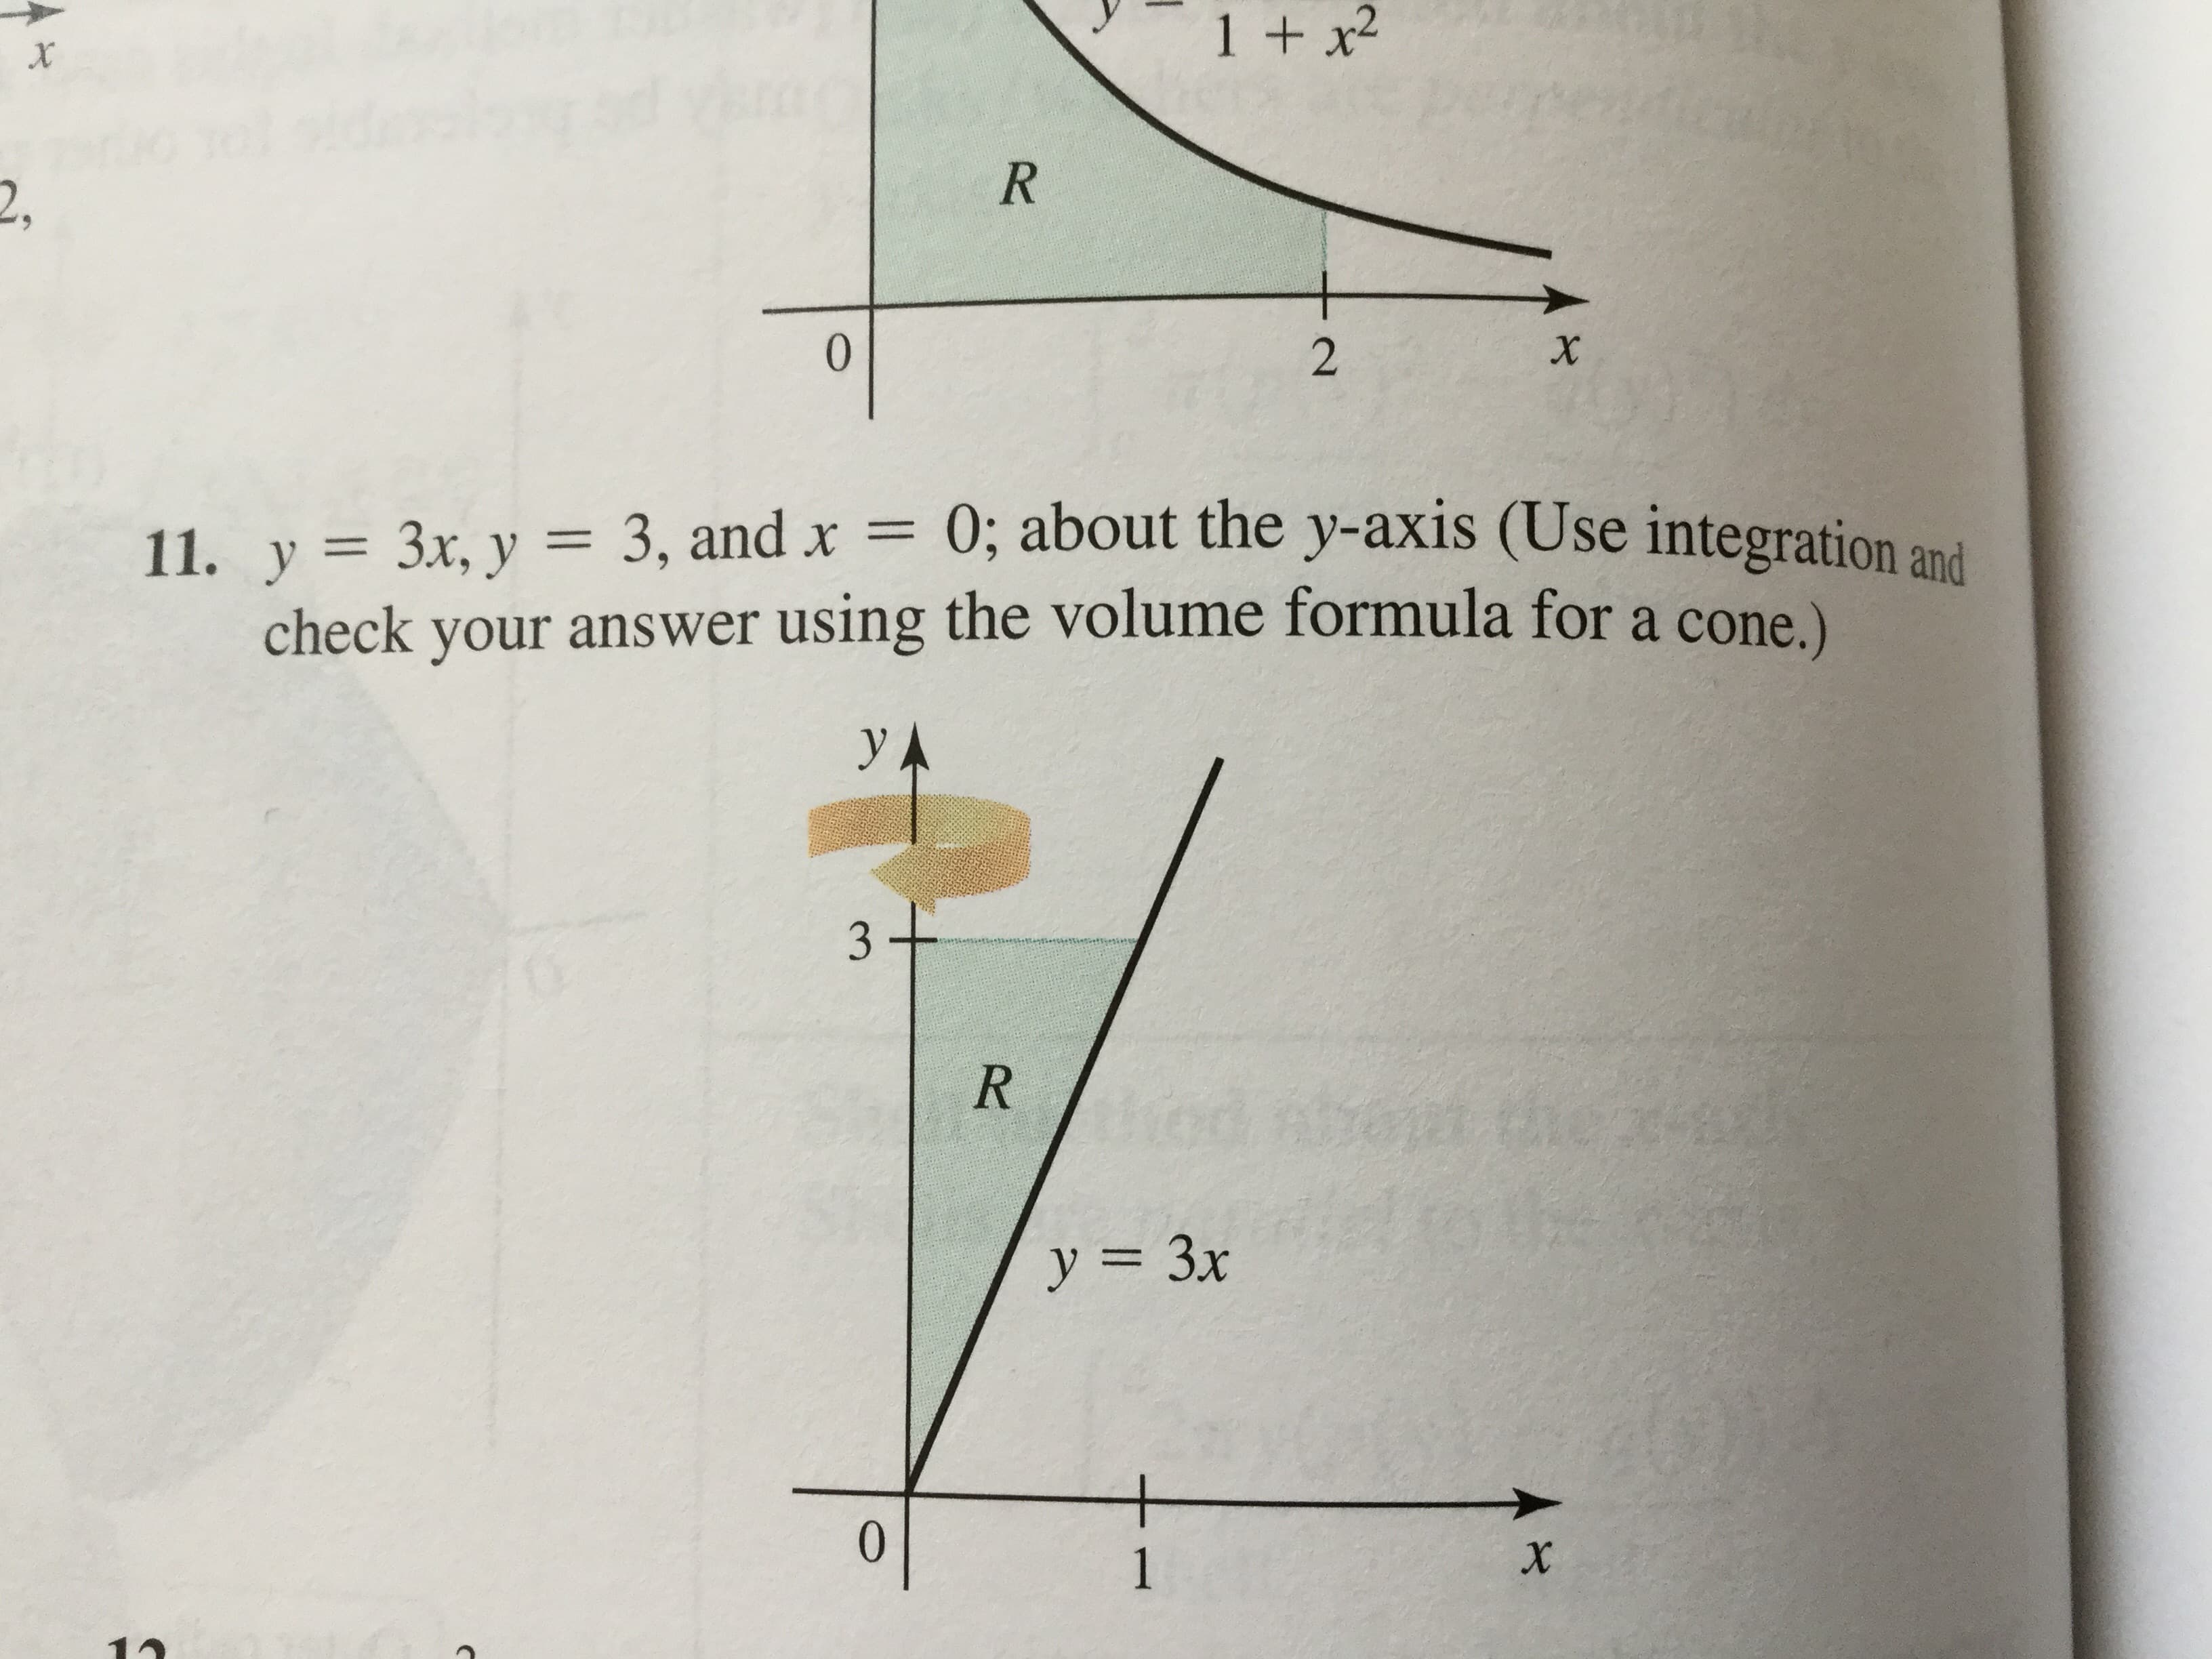 1 +x2
R
2.
X
2
= 0; about the y-axis (Use integration and
11. y 3x, y = 3, and x
check your answer using the volume formula for a cone.)
yA
3 +
R
tioad
y = 3x
+
0
X
1
